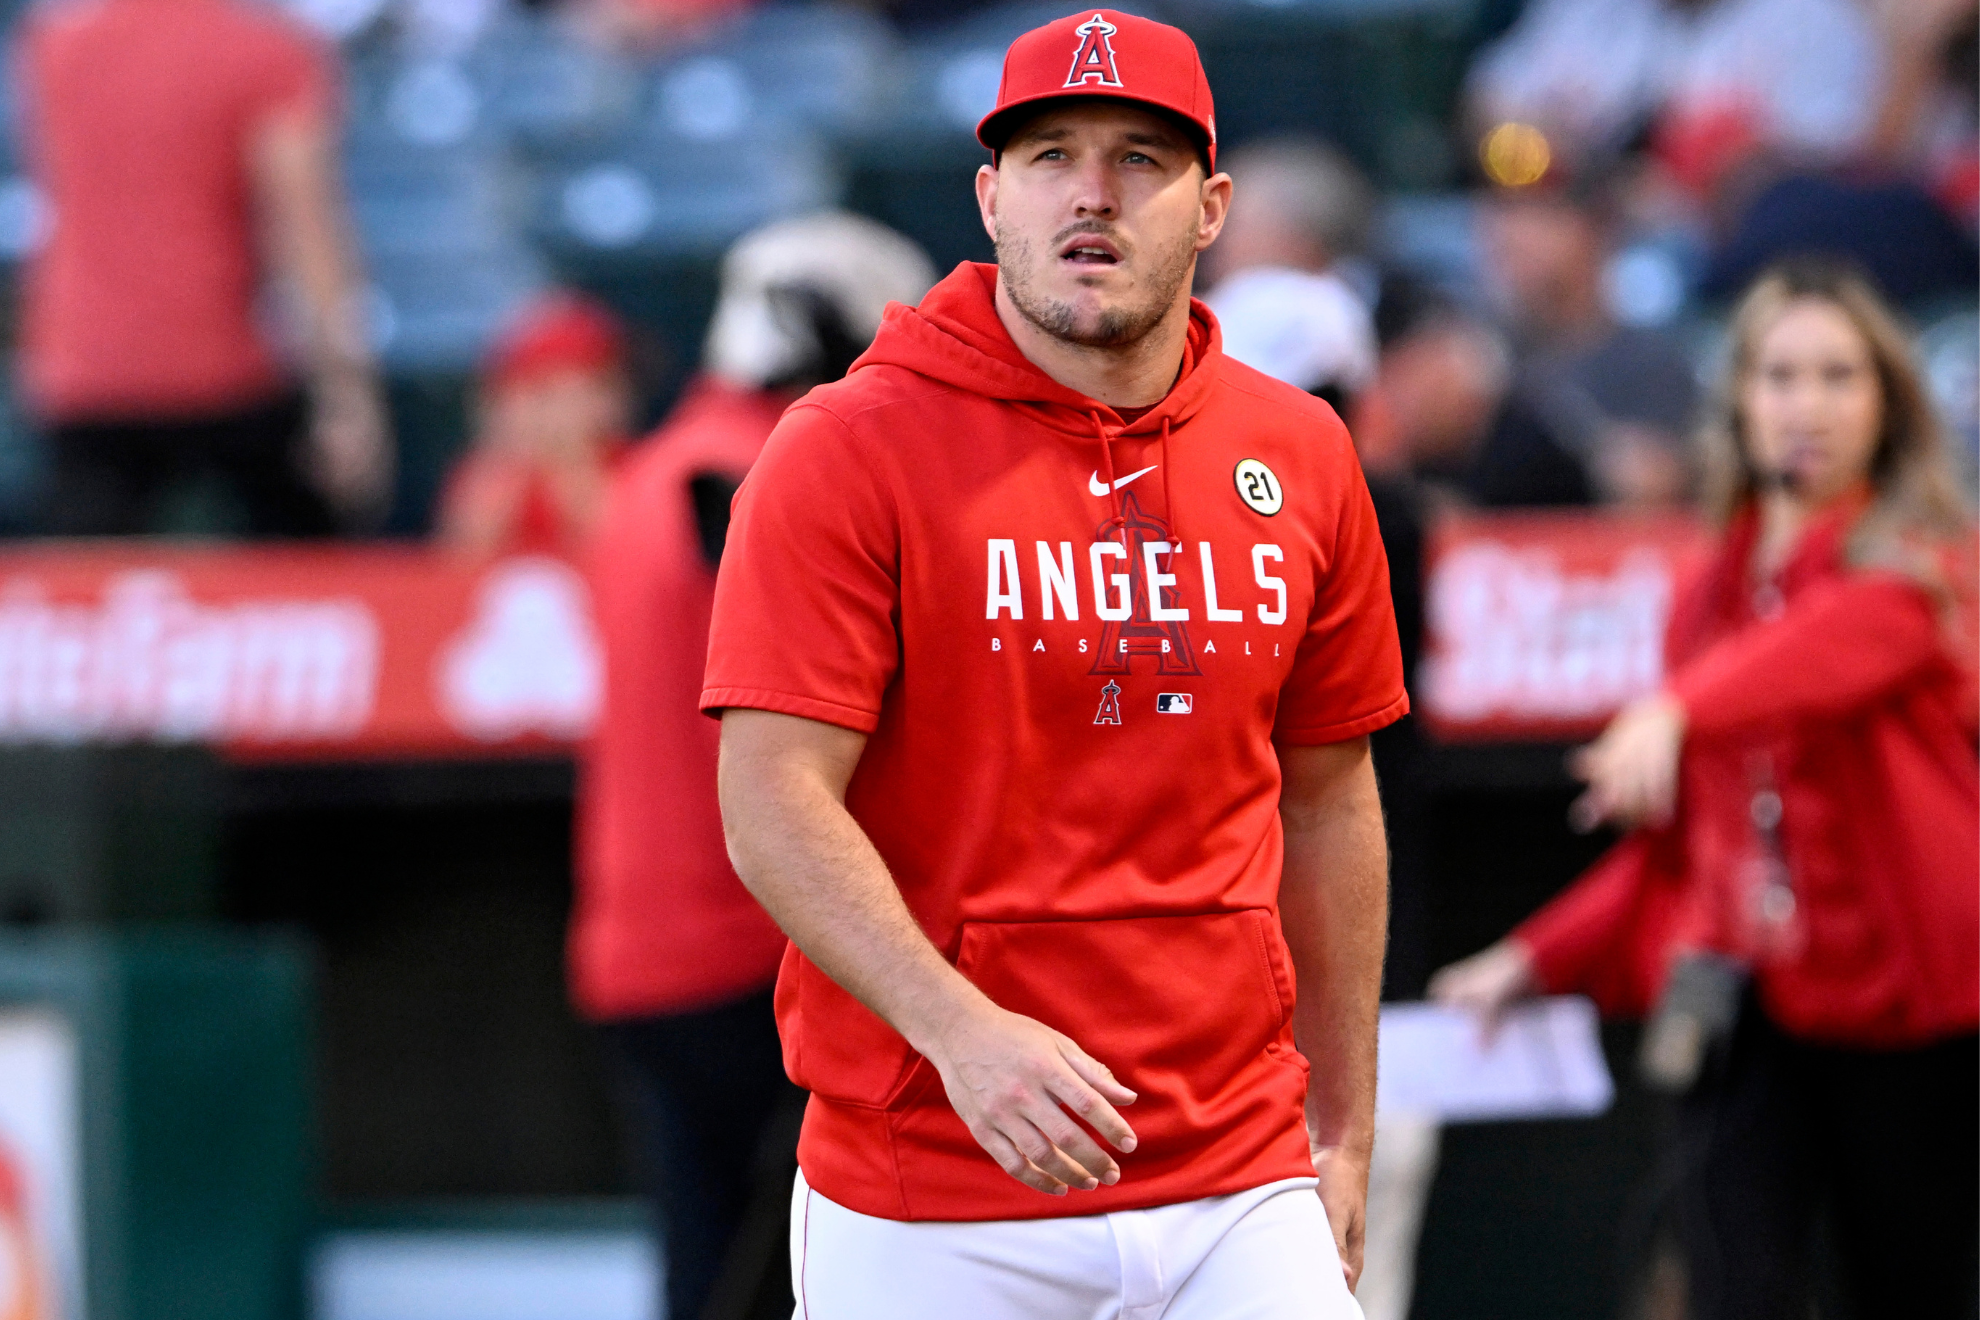 Trout, a future Hall of Fame inductee, has been beset by injuries in recent seasons.